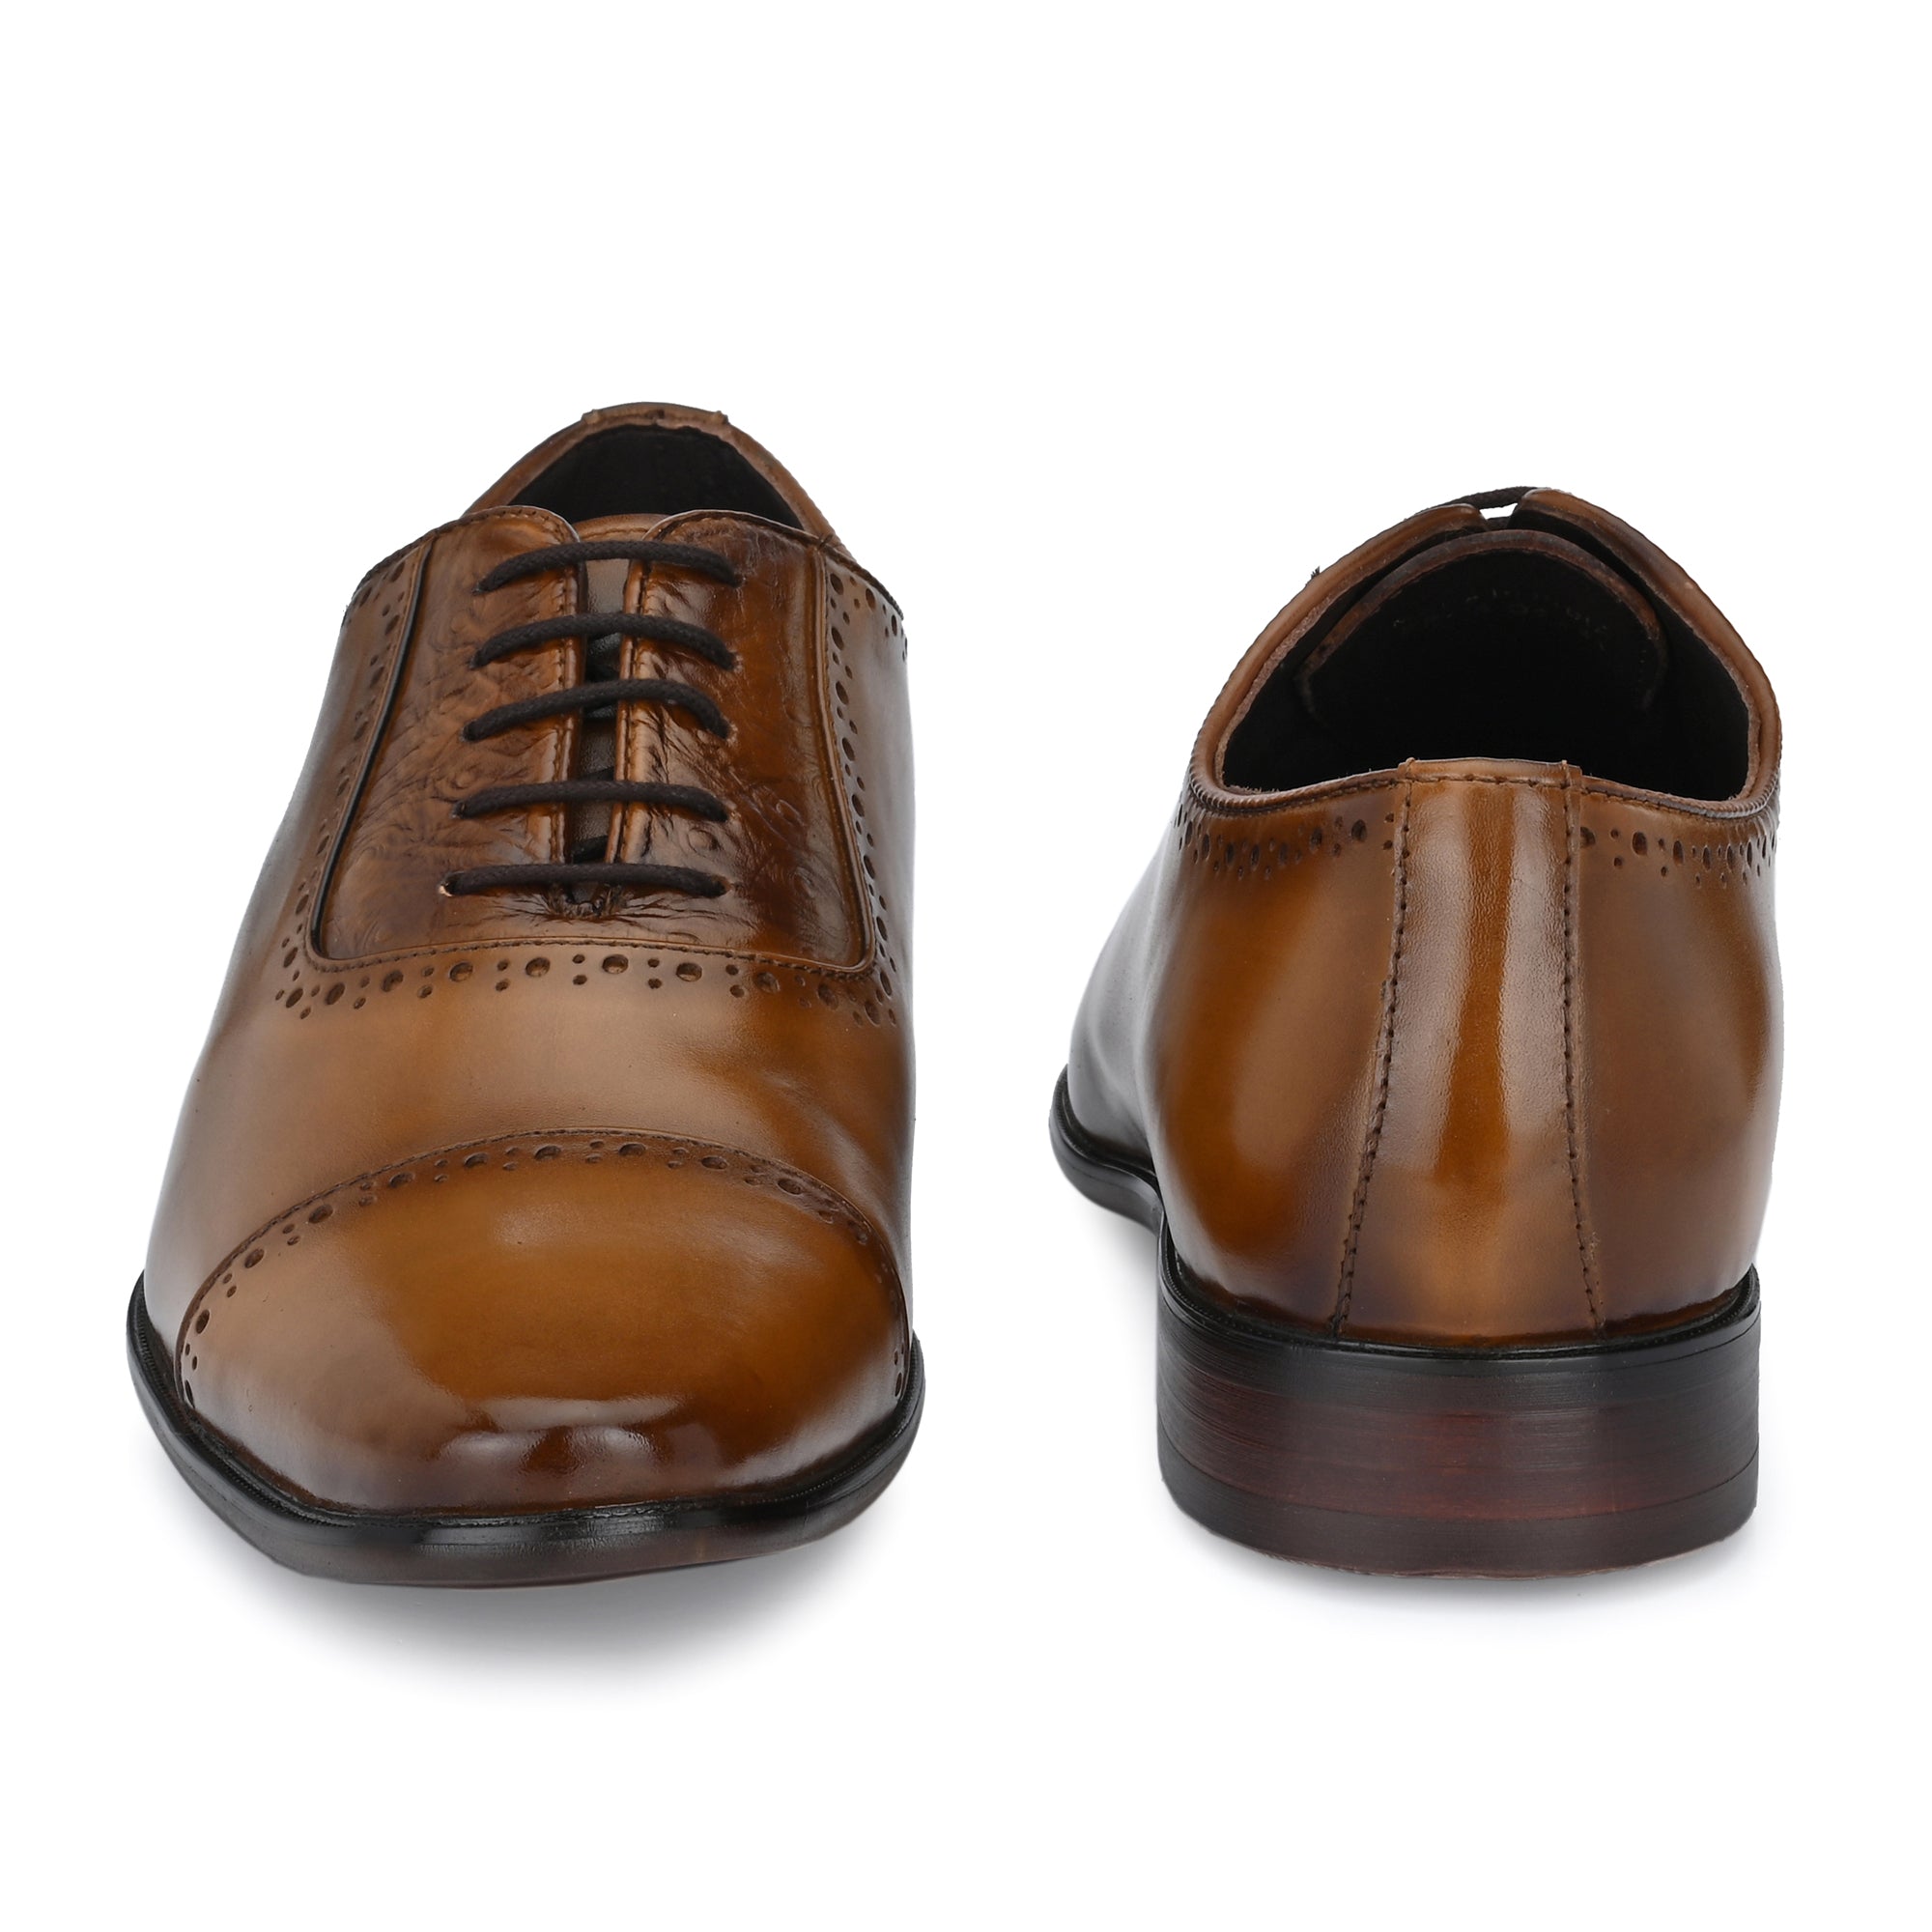 Egoss Best Formal Shoes For Men Laceup